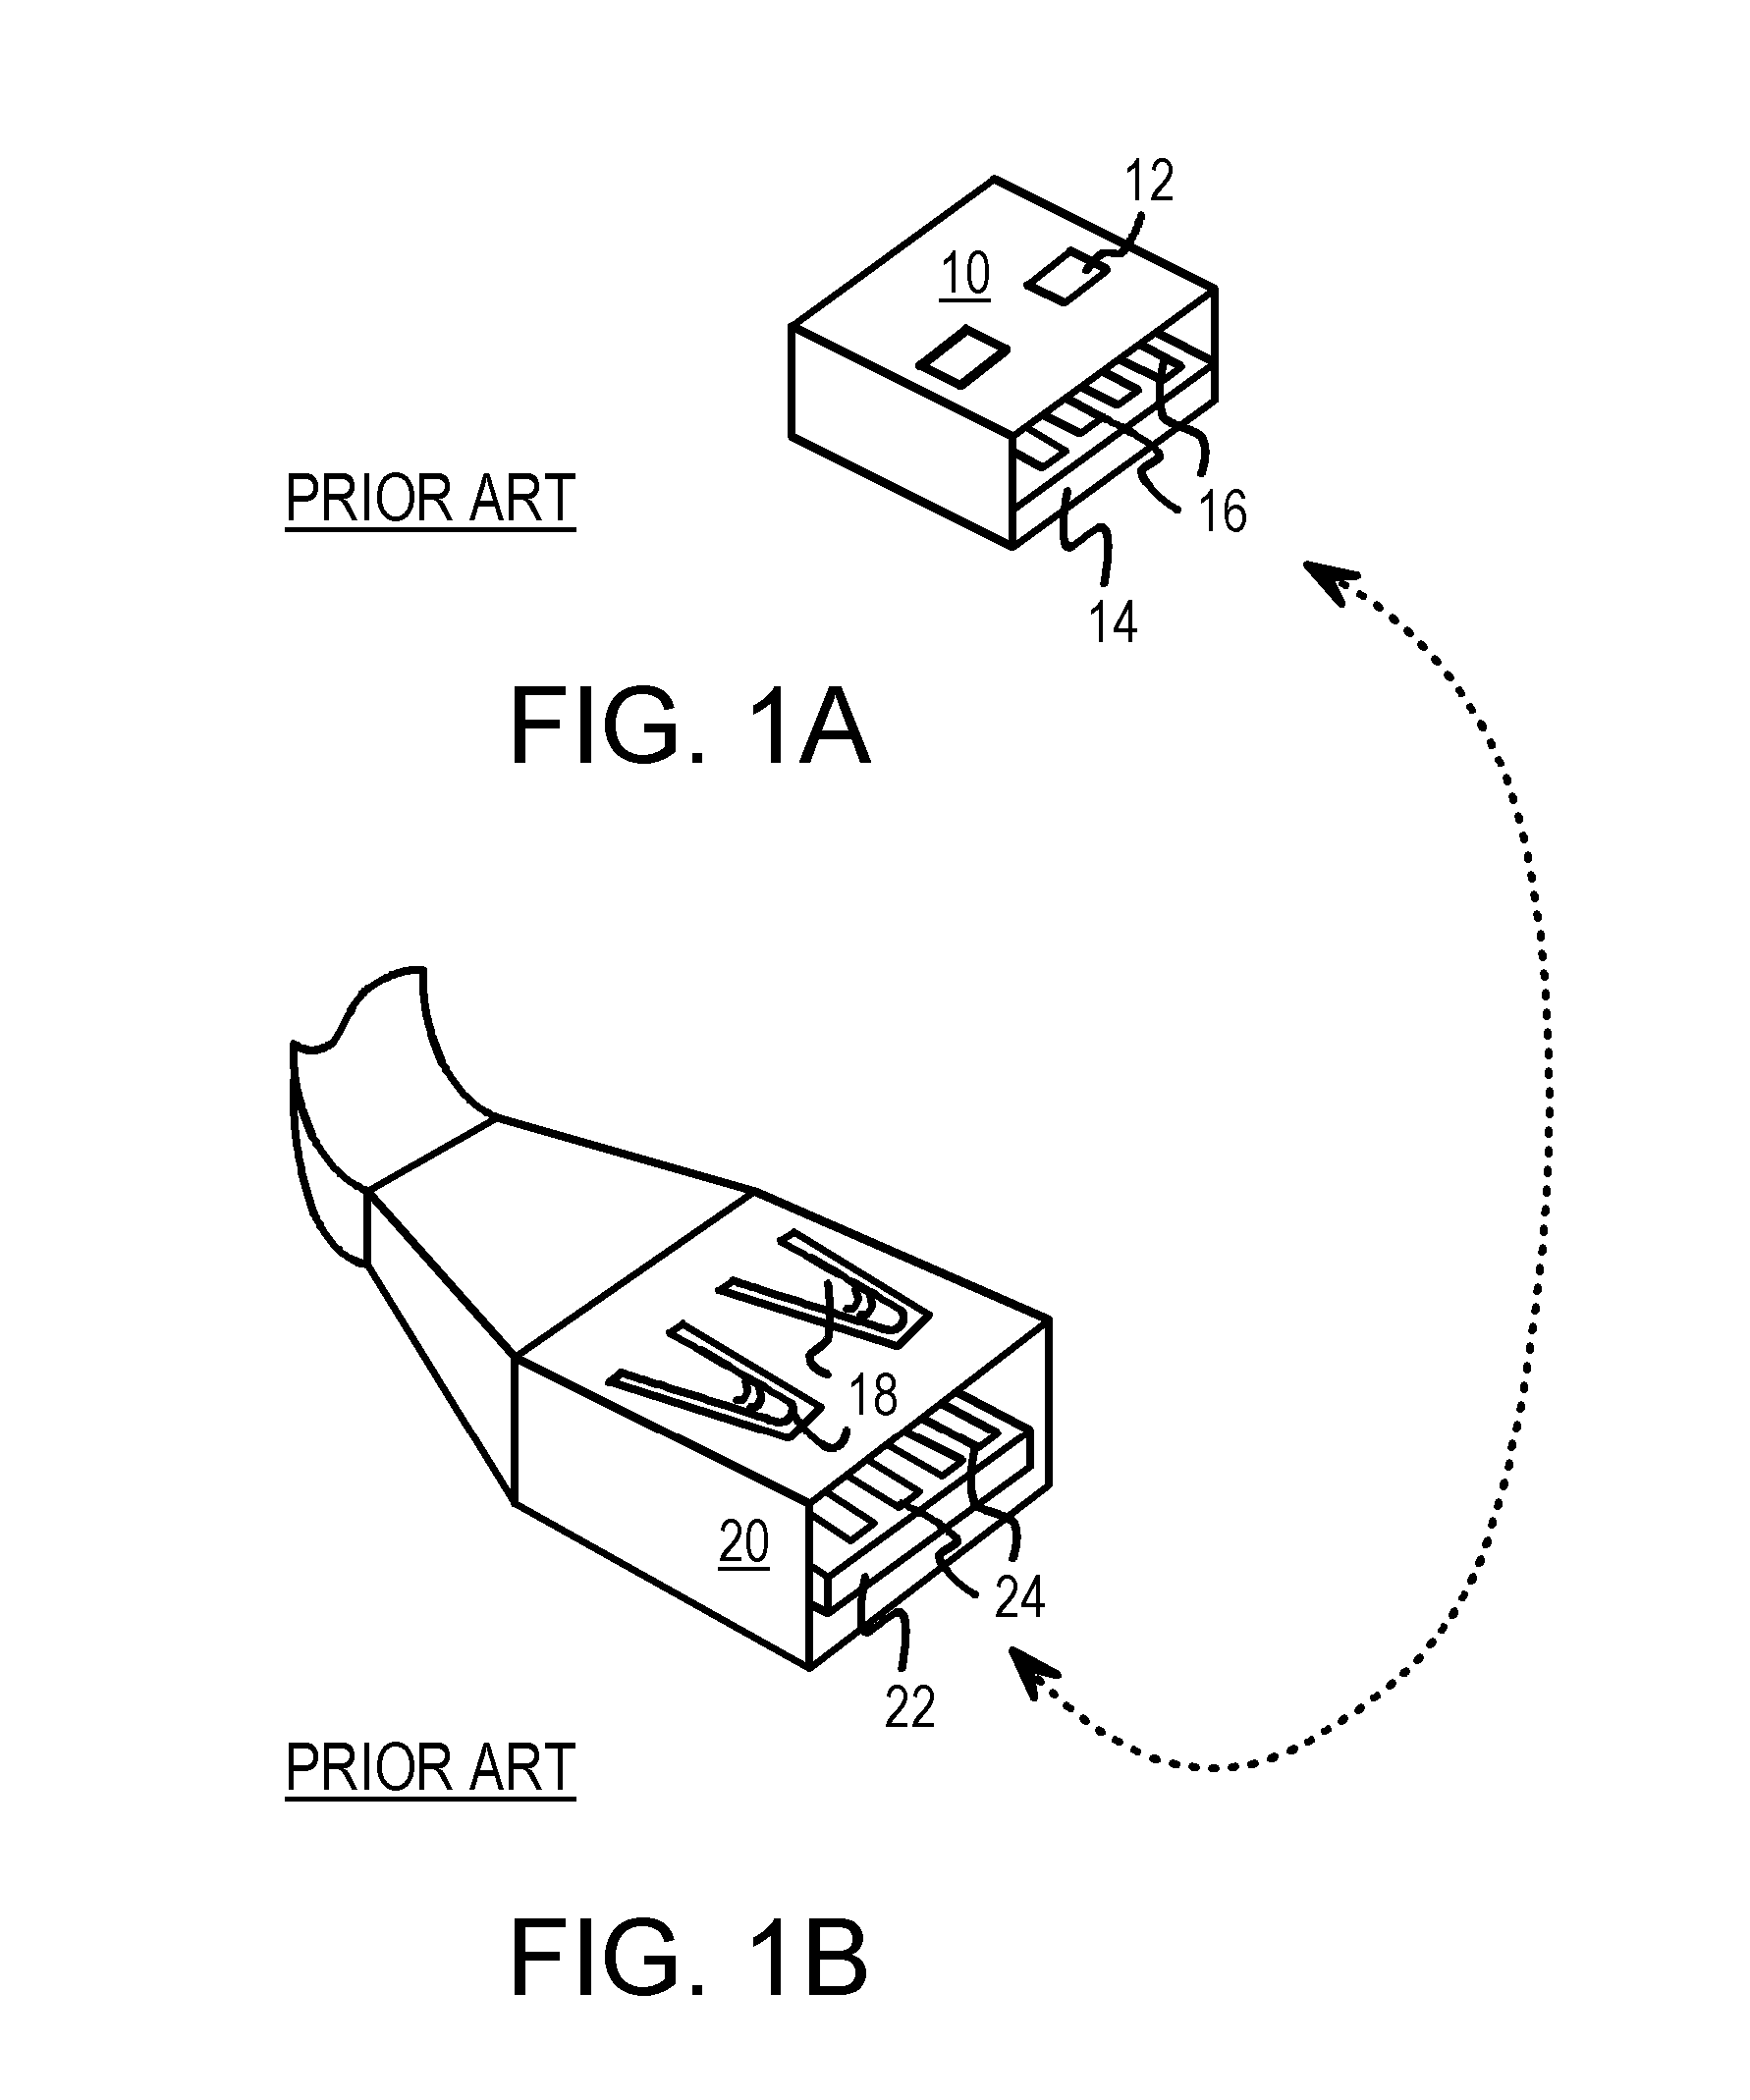 Dual-Personality Extended-USB Plug and Receptacle with PCI-Express or Serial-AT-Attachment Extensions